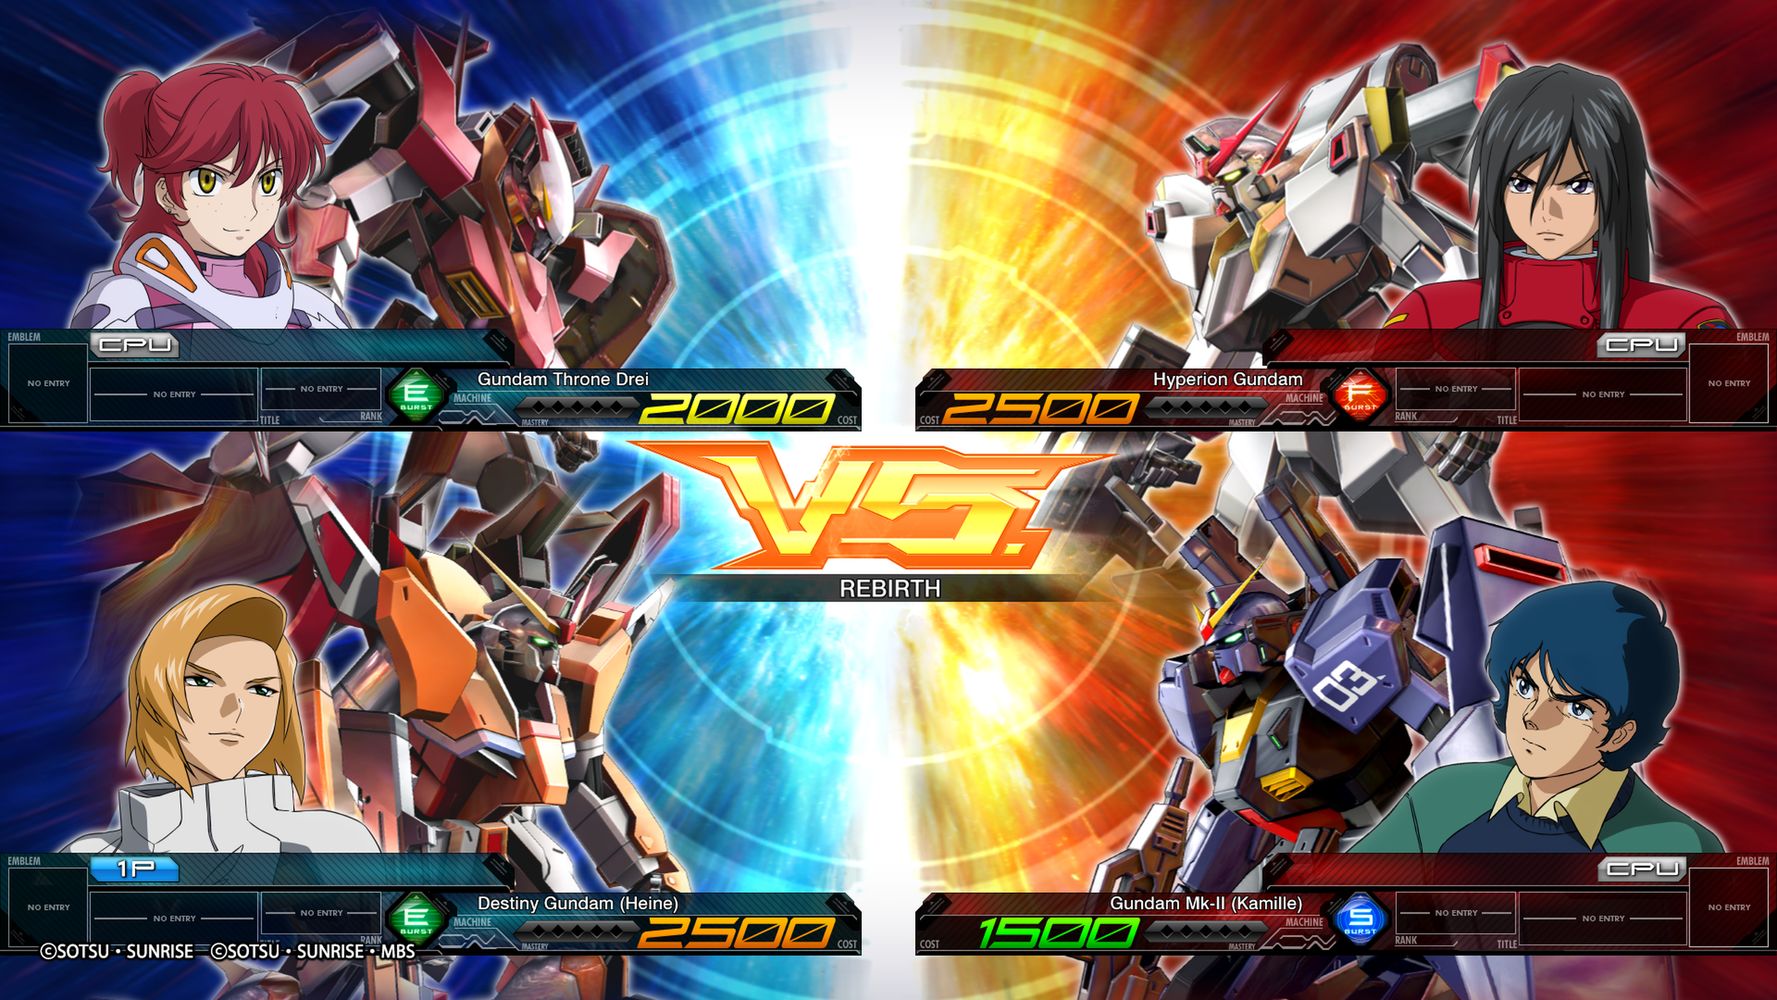 Mobile Suit Gundam EXTREME VS. MAXI BOOST ON